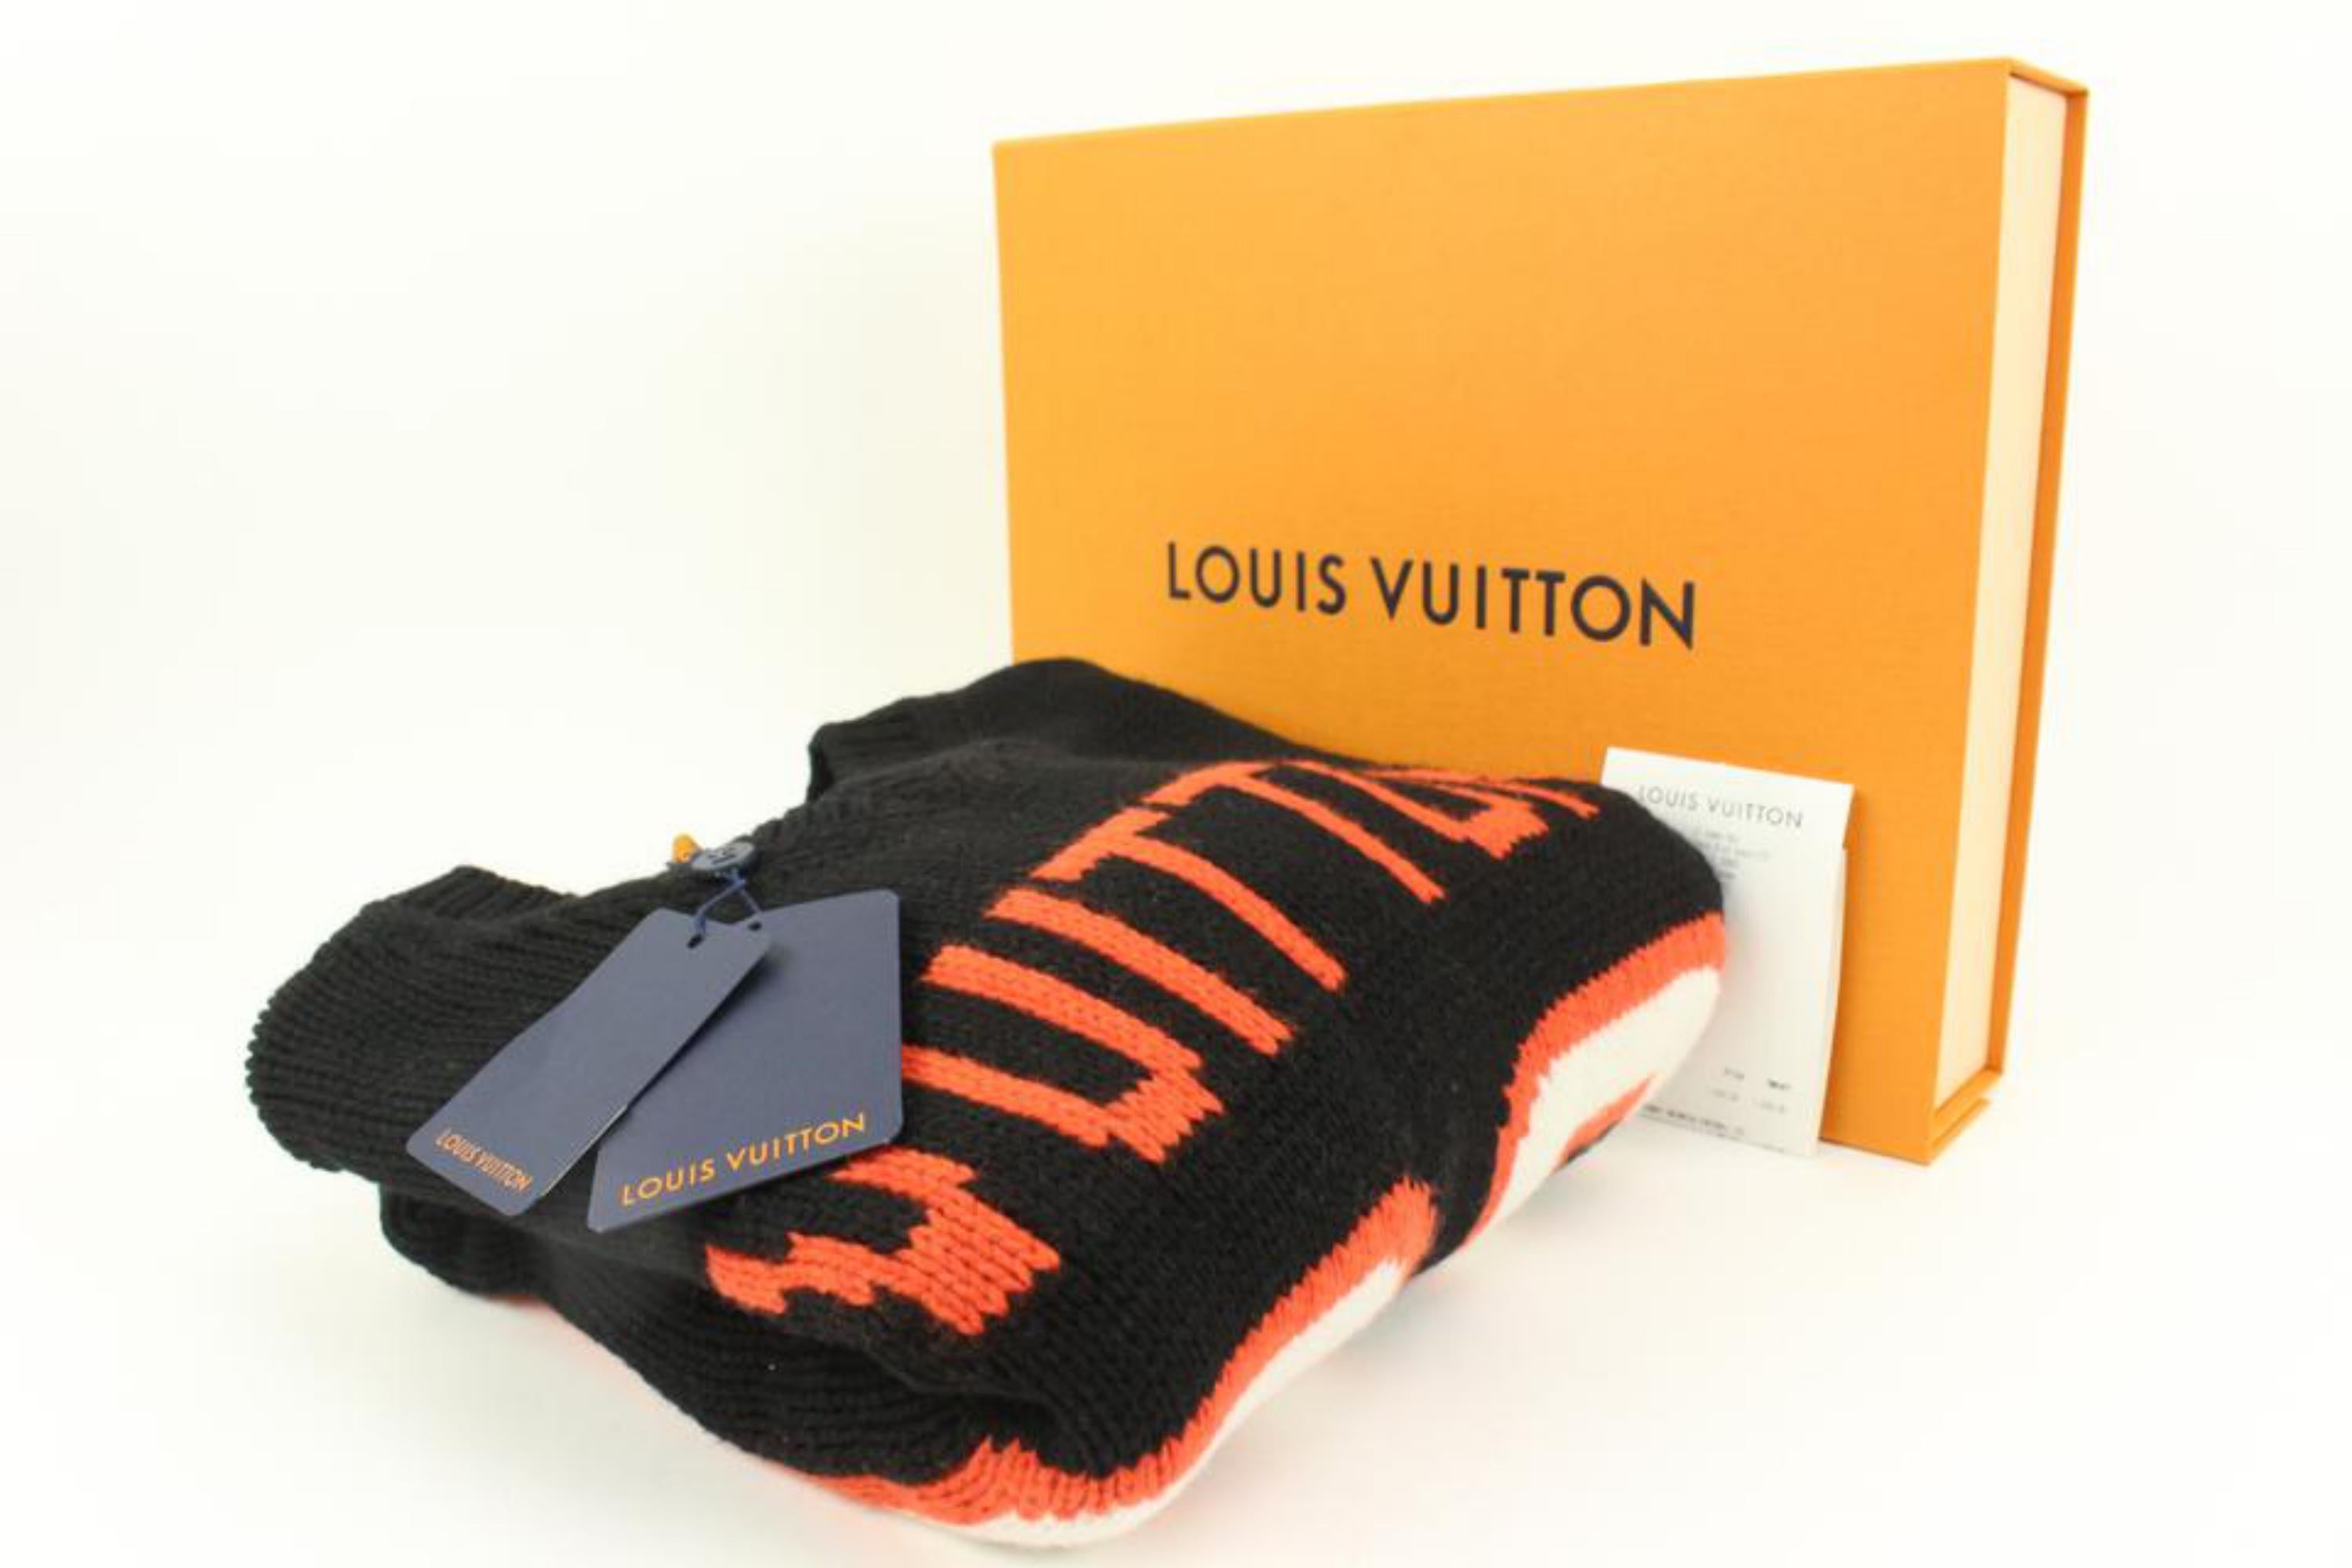 Louis Vuitton Mens XL Virgil Abloh Black Knit Chunky Intarsia Football Shirt 31lk37s
Date Code/Serial Number: CA36929
Made In: Italy
Measurements: Length:  24